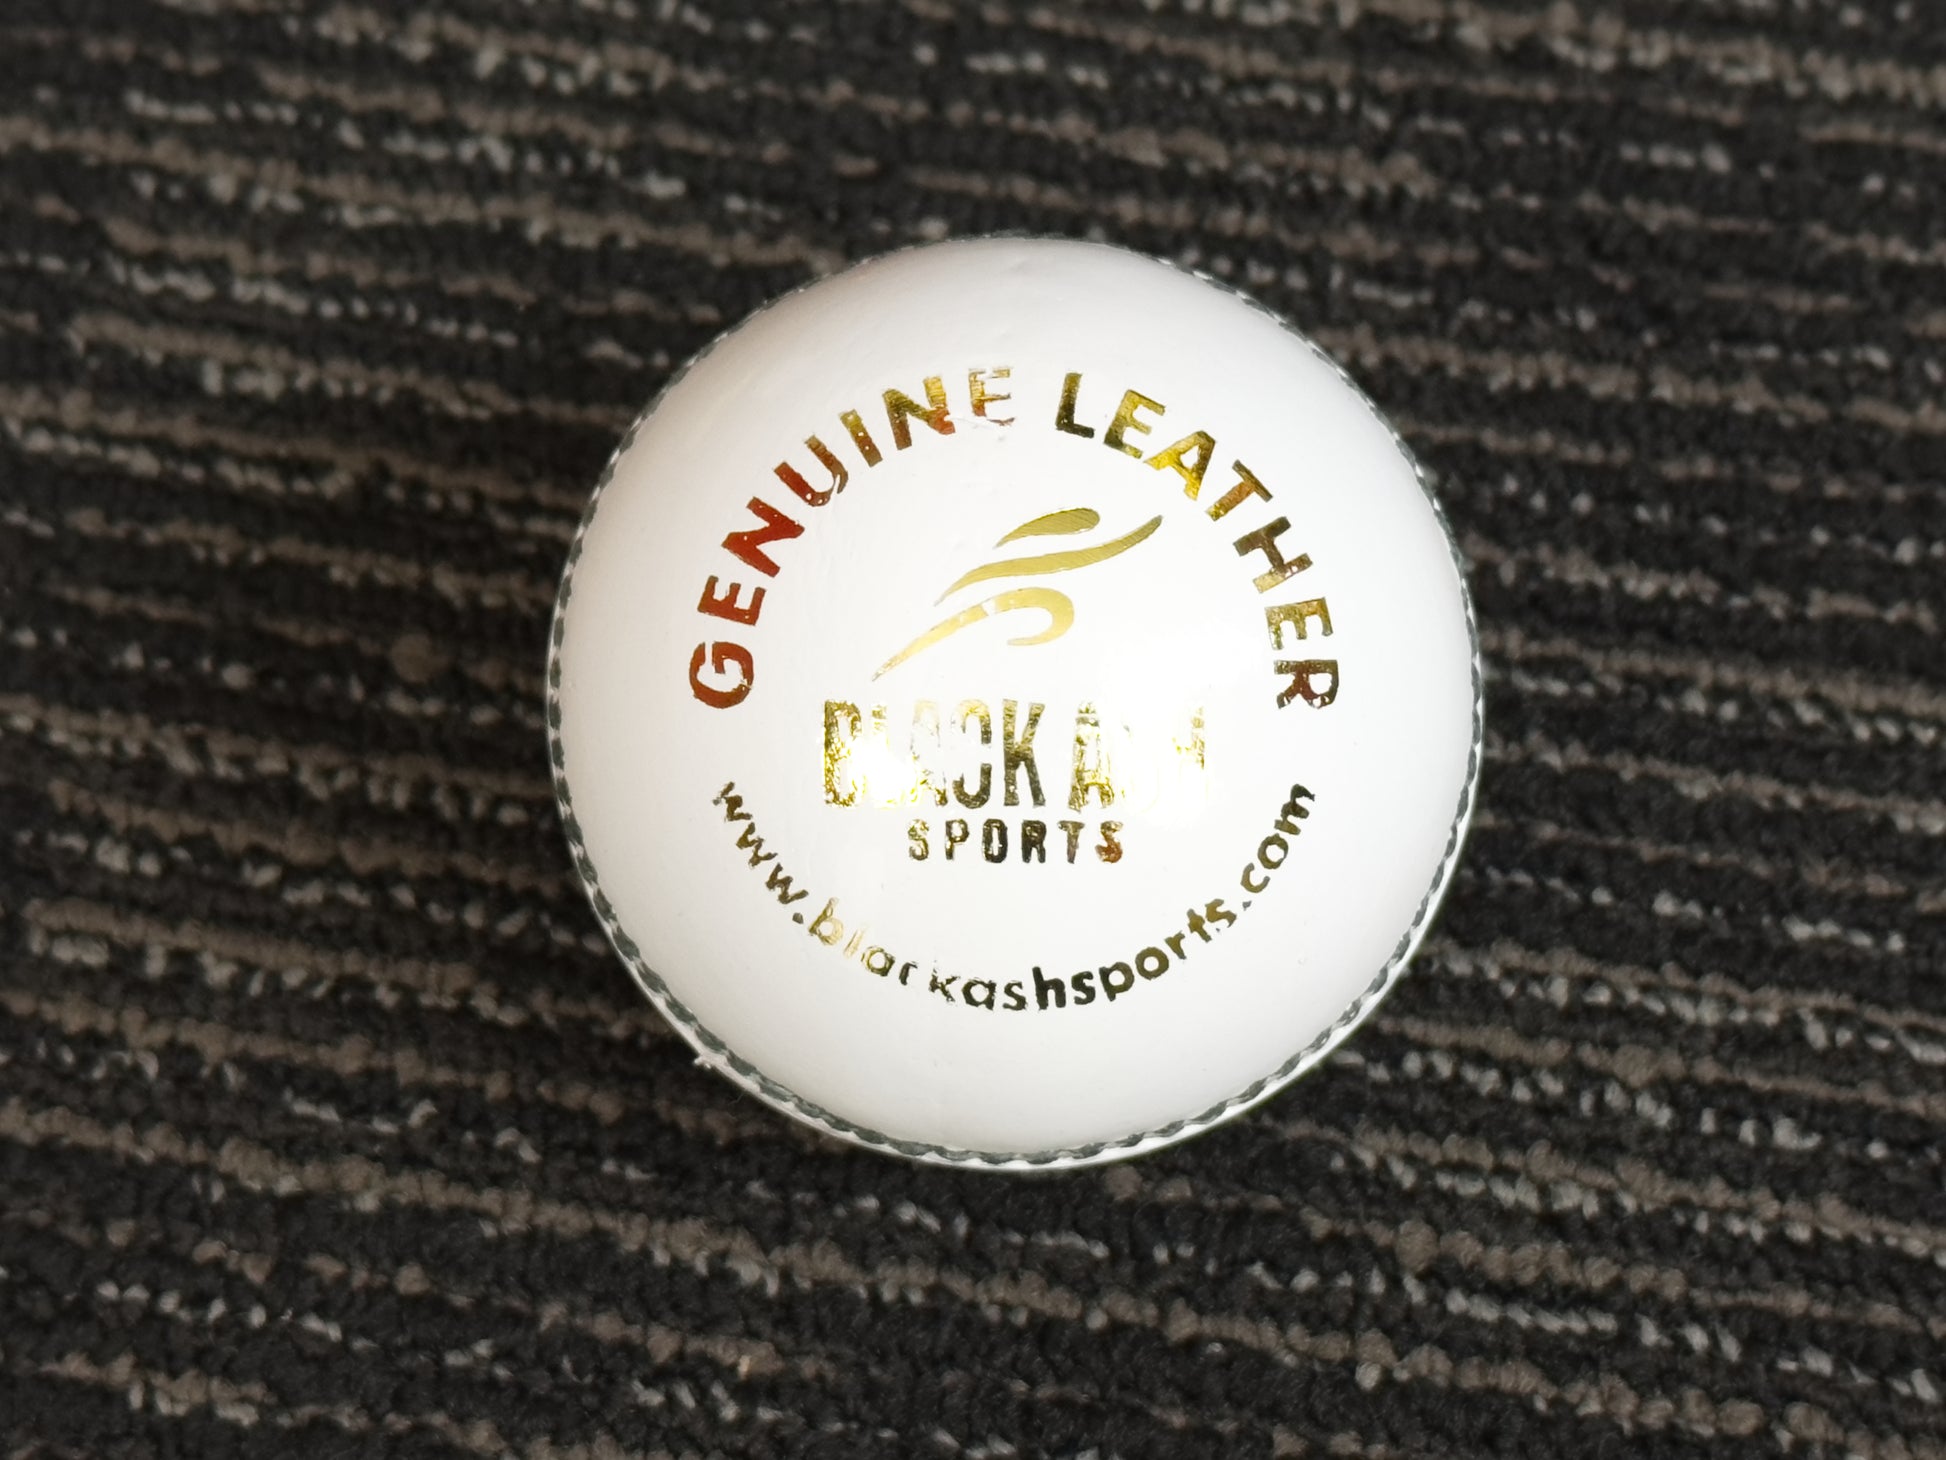 Pack of 6 white cricket balls from Black Ash Premium grade, made of genuine leather with 4-piece construction for excellent shape retention. These premium quality balls are machine-stitched, adhere to MCC regulations, and are ideal for 30 to 35 overs, each weighing 156 grams (5.5 ounces).